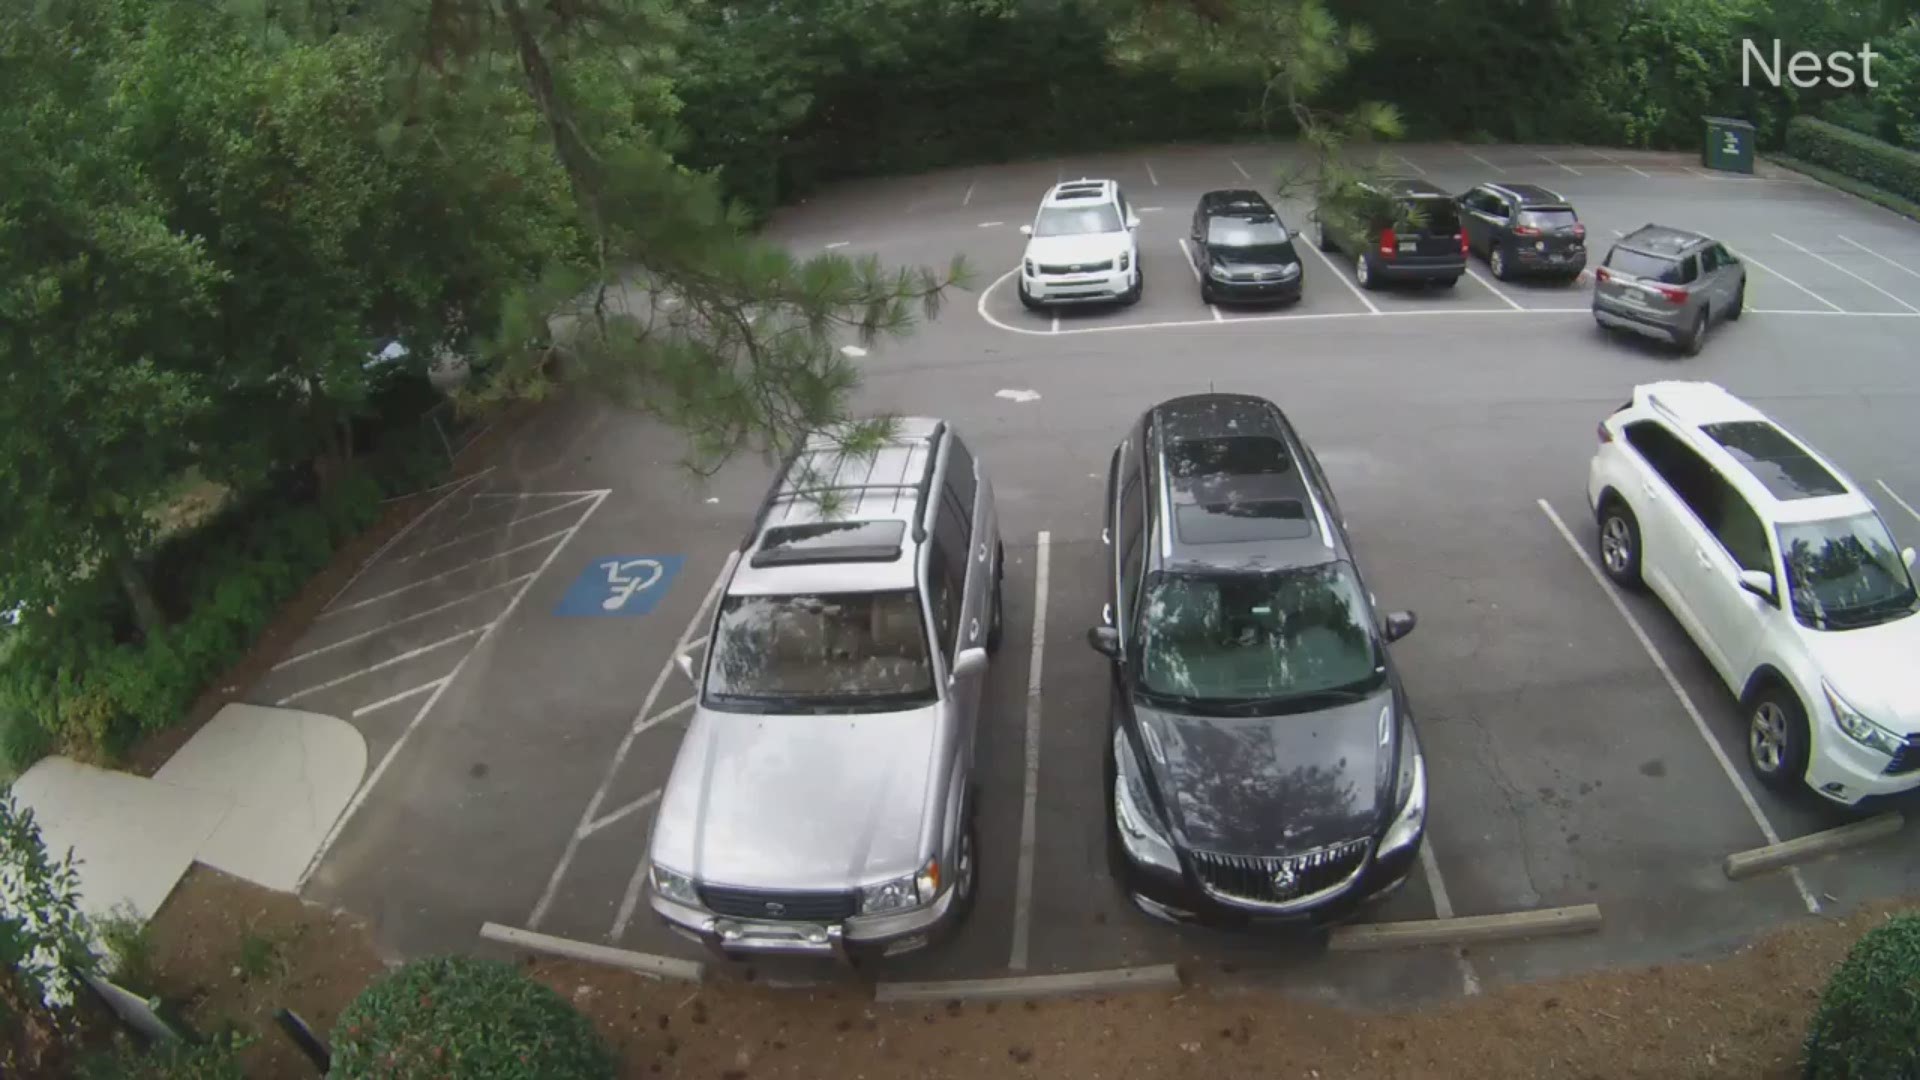 Dunwoody Police released the video Tuesday morning and said they are looking for info on a 2018-2019 GMC Acadia seen in the video.